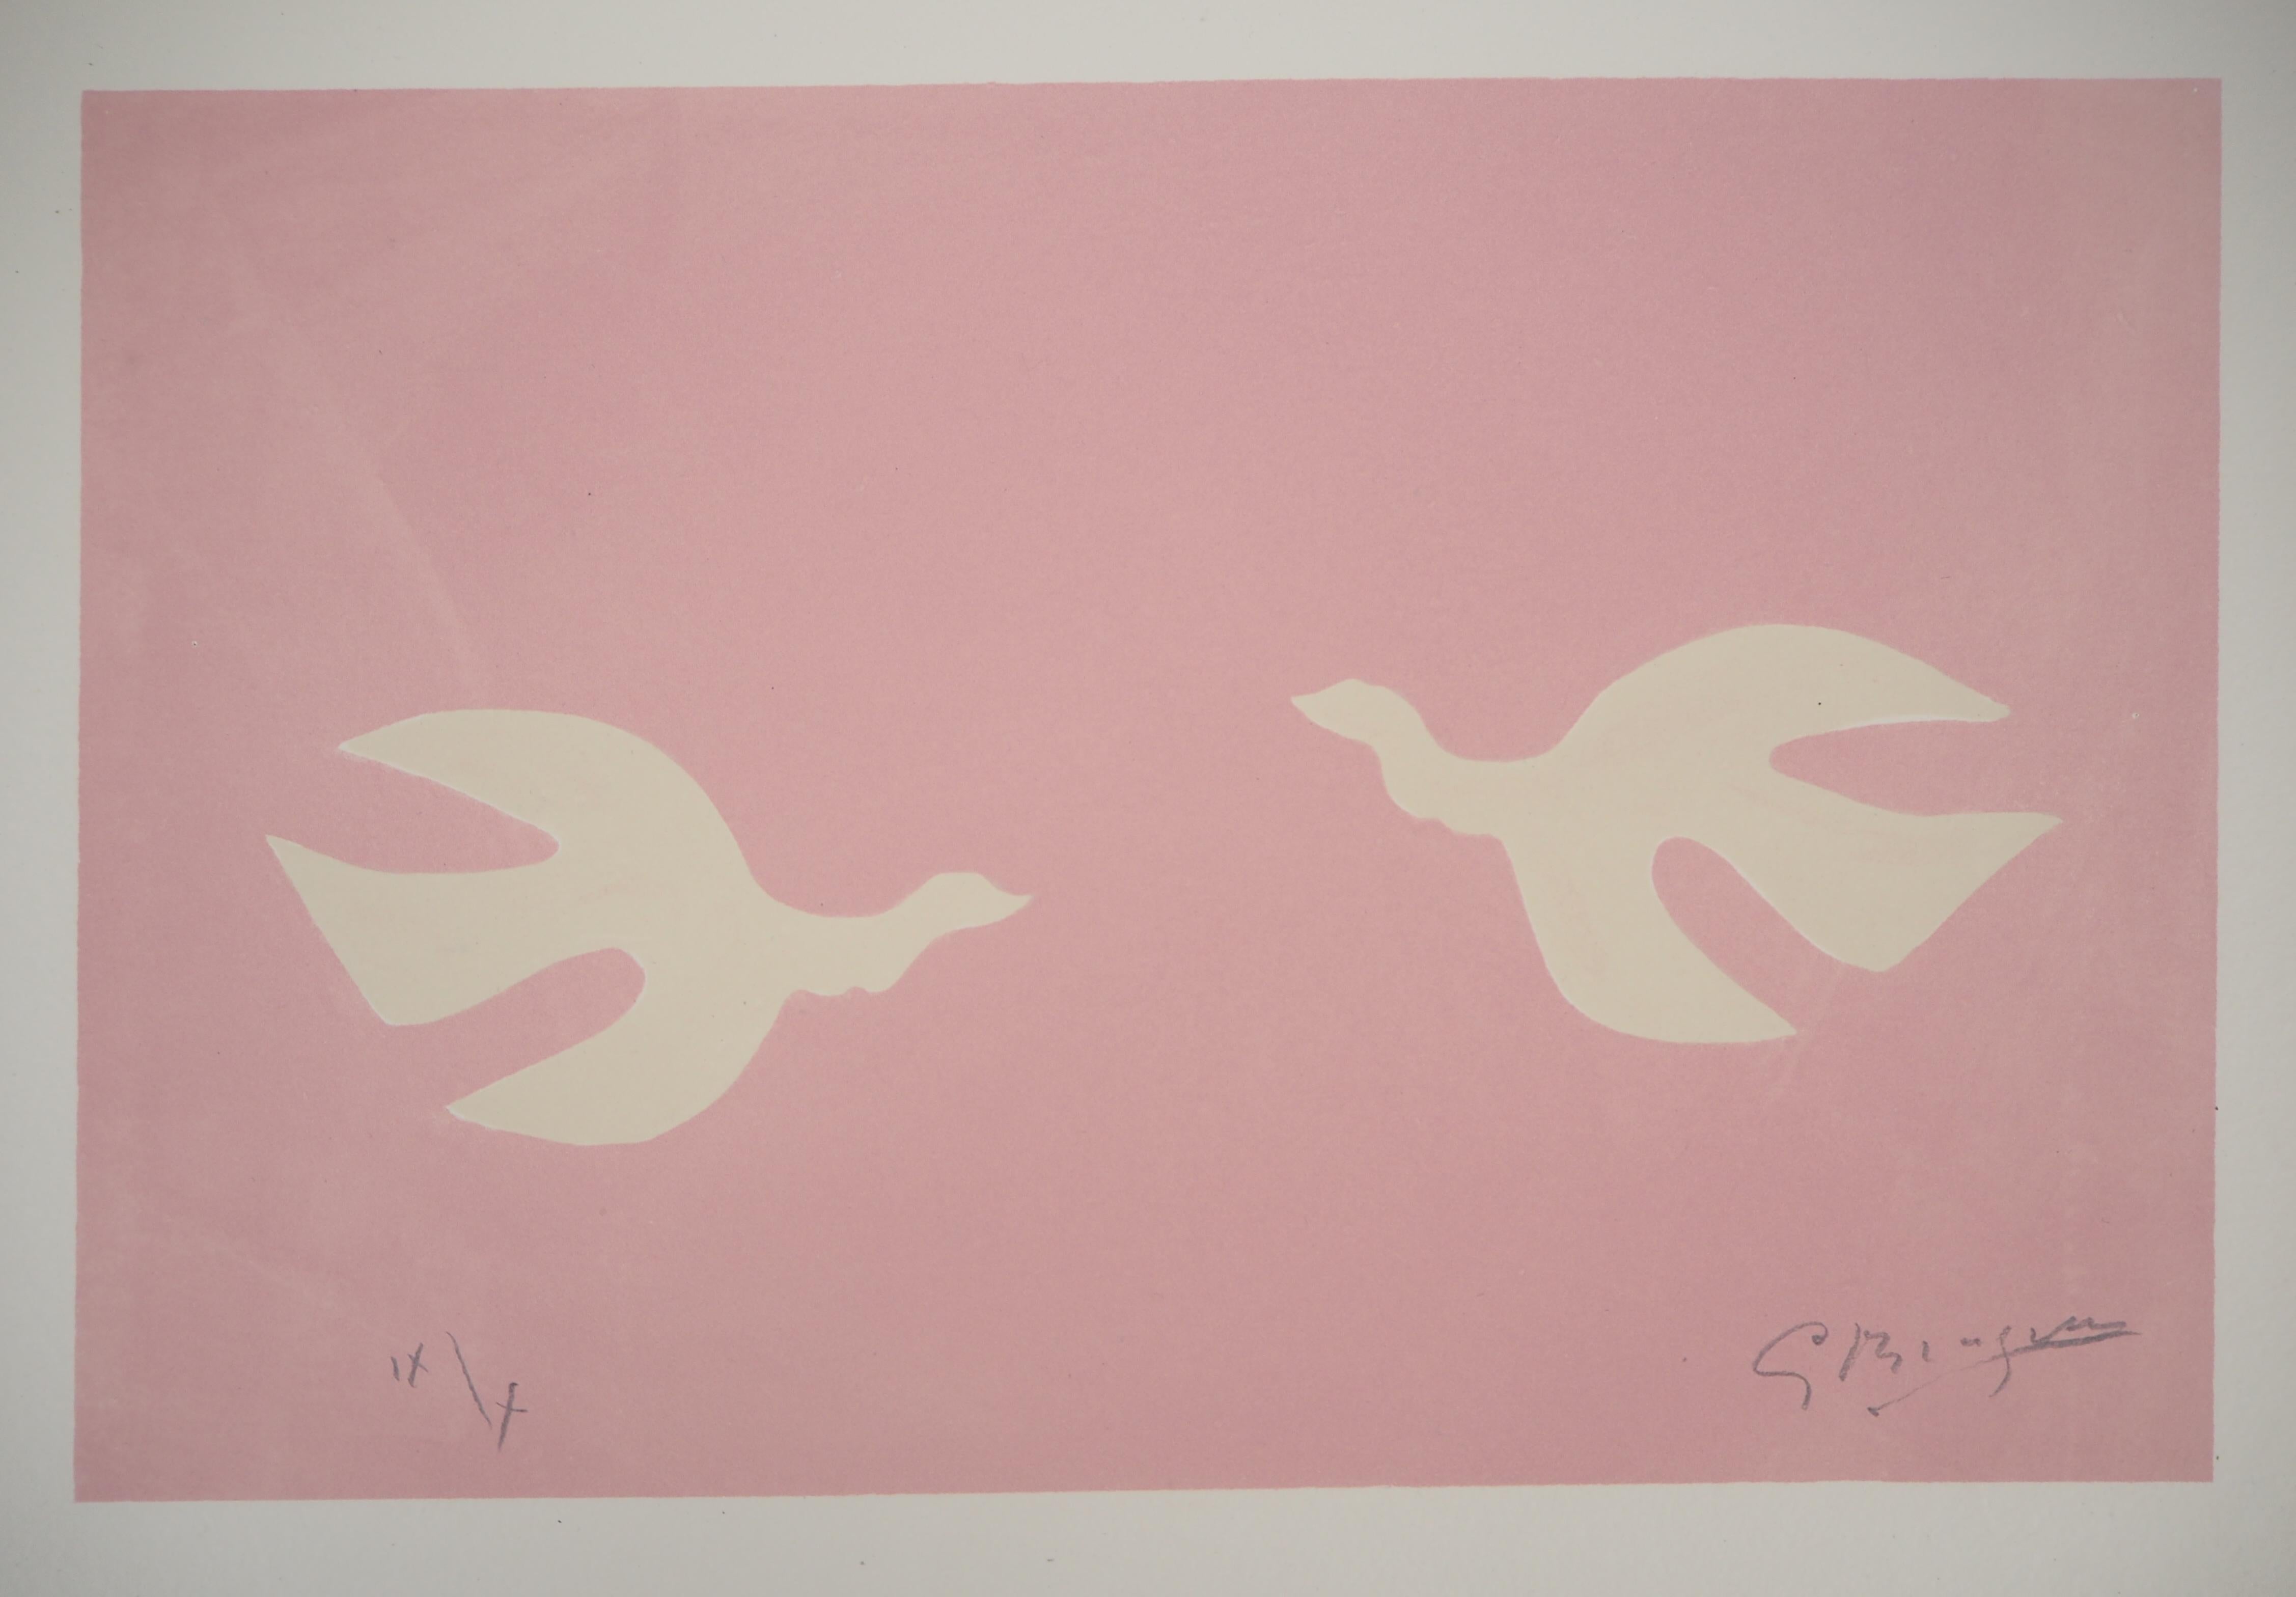 Two Flying Birds - Original lithograph, Handsigned, Ltd 10 copies (Mourlot #86) - Print by Georges Braque